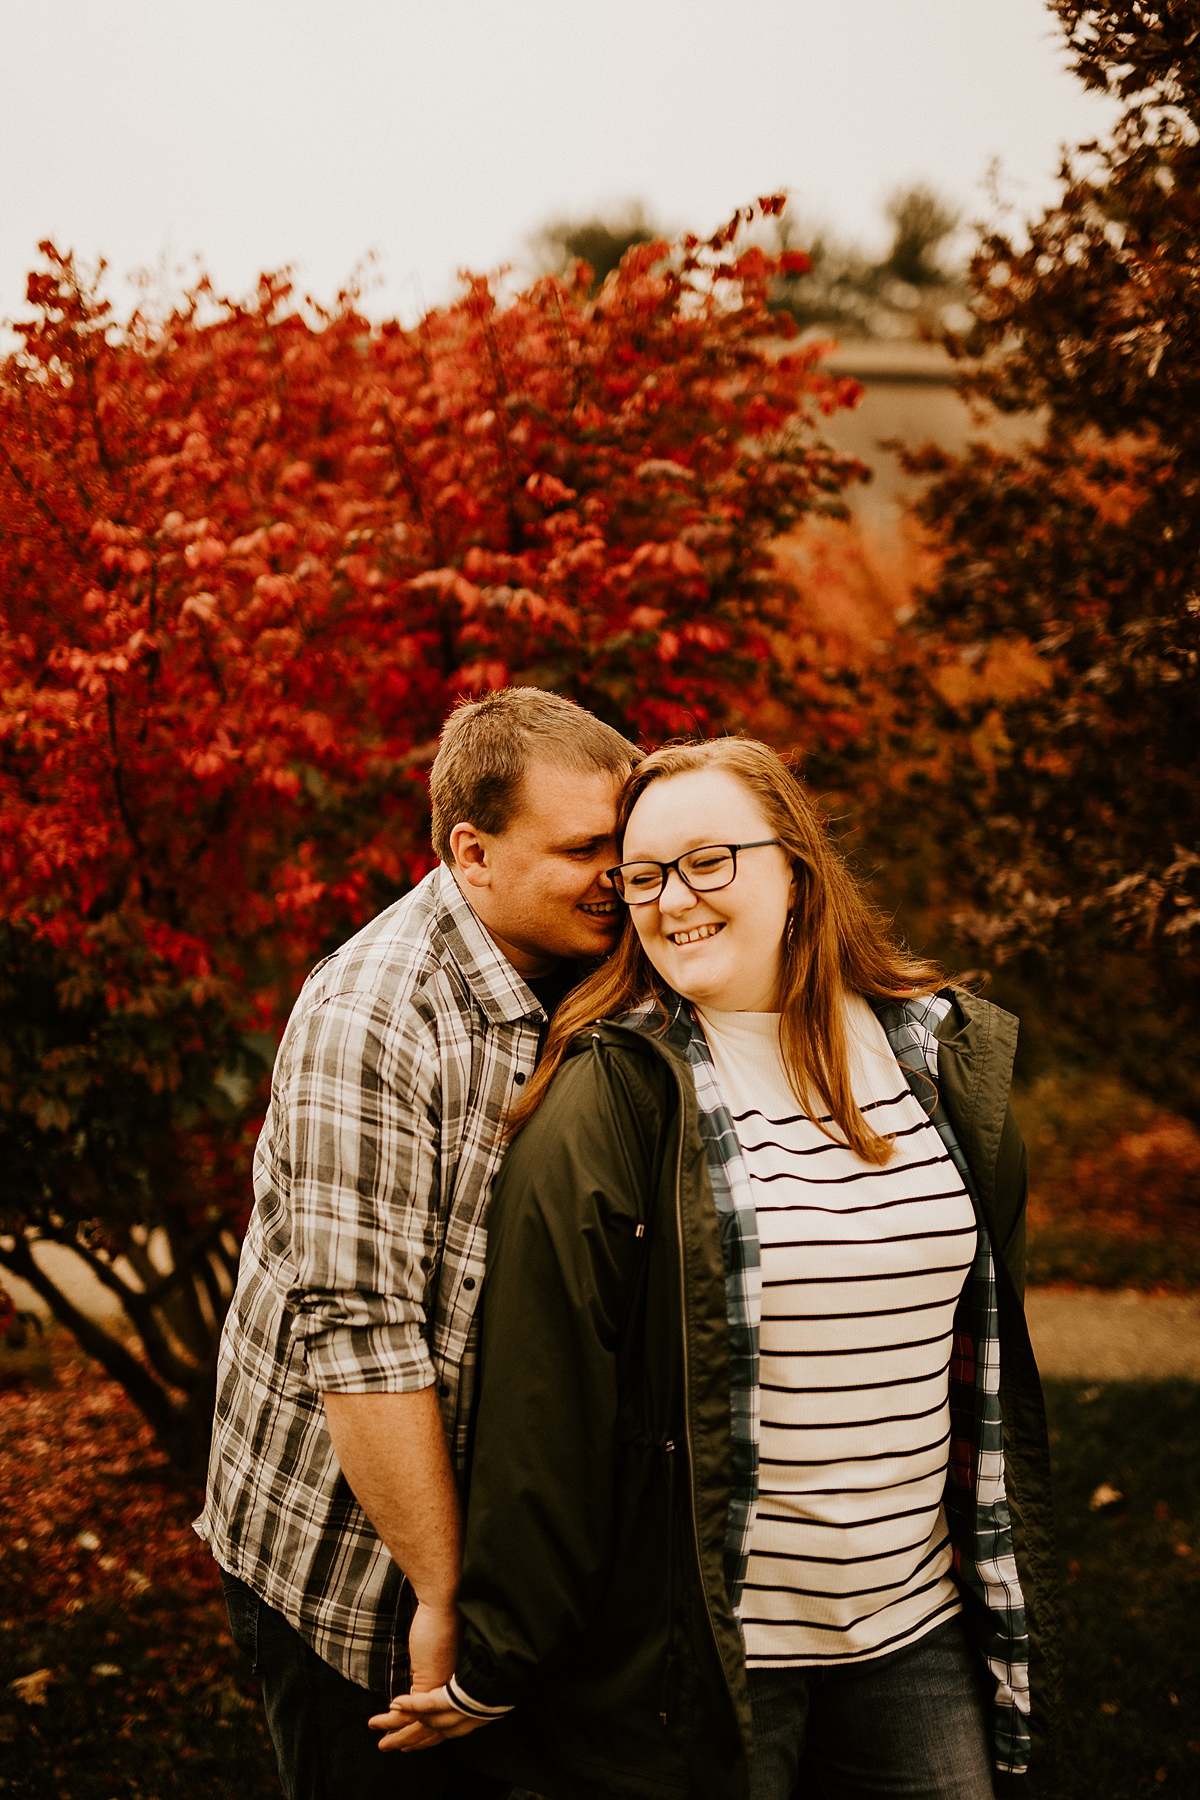 midwest fall engagement session | allison slater photography11.jpg